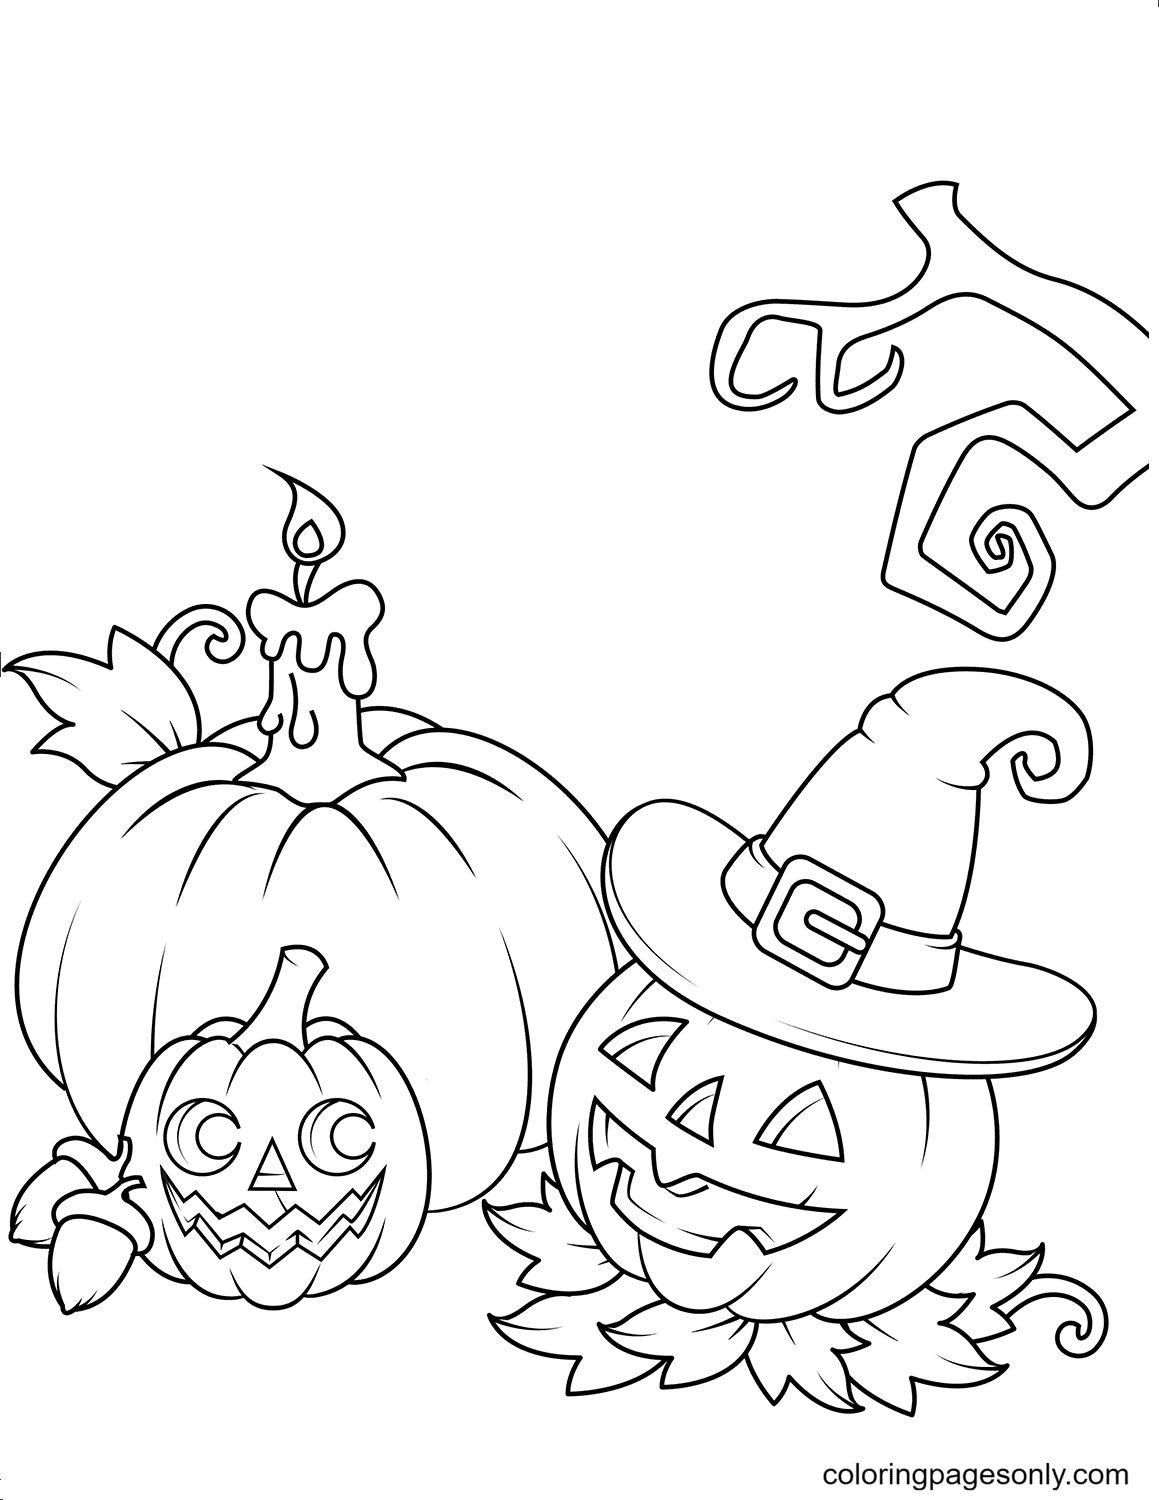 Jack O’Lanterns and Pumpkin Coloring Pages